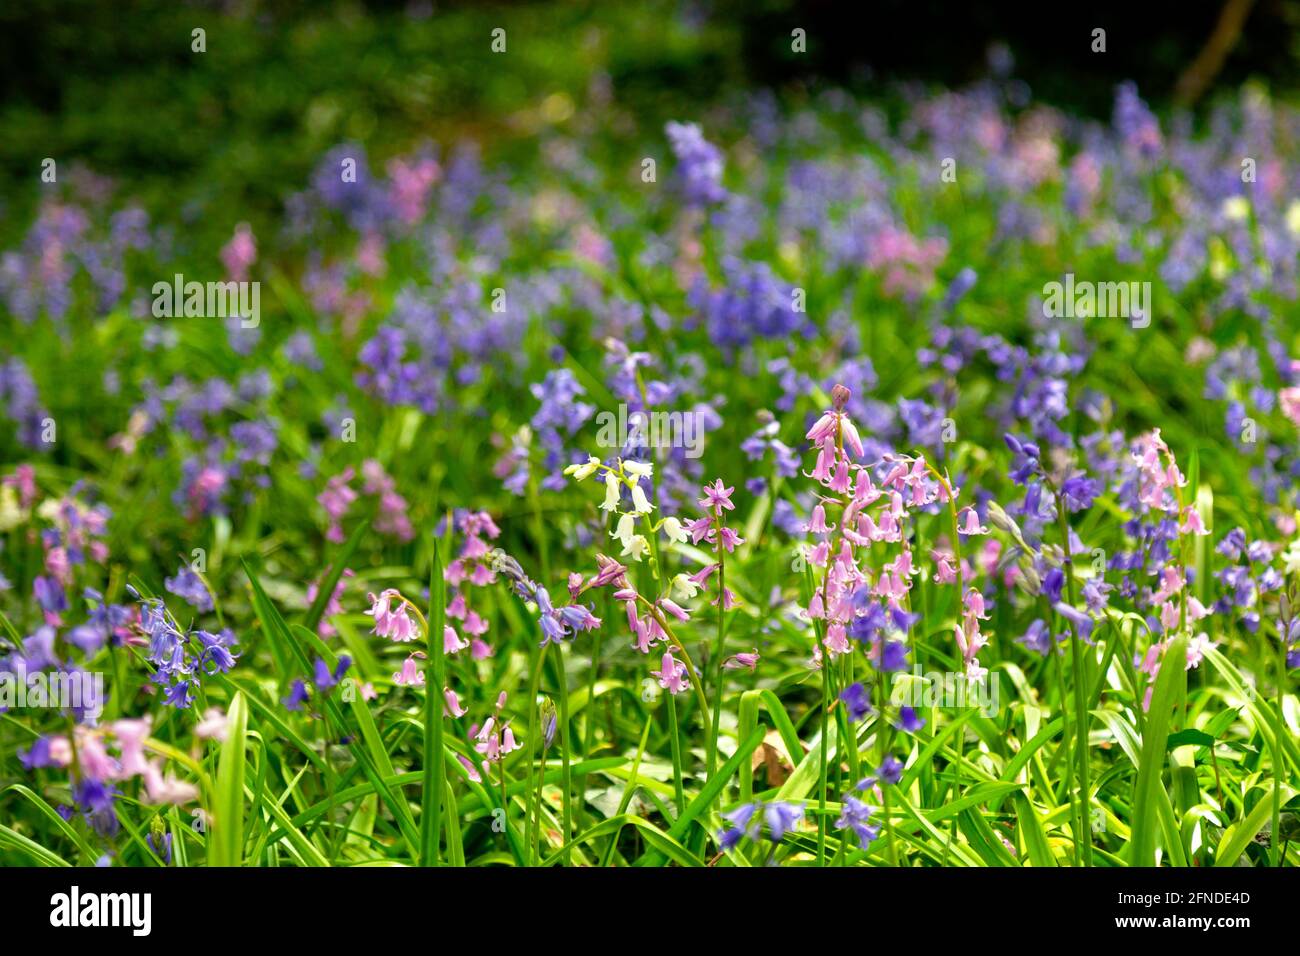 Bluebells and white and pink hybrid Spanish bluebells in Hampsead Heath, London, UK Stock Photo